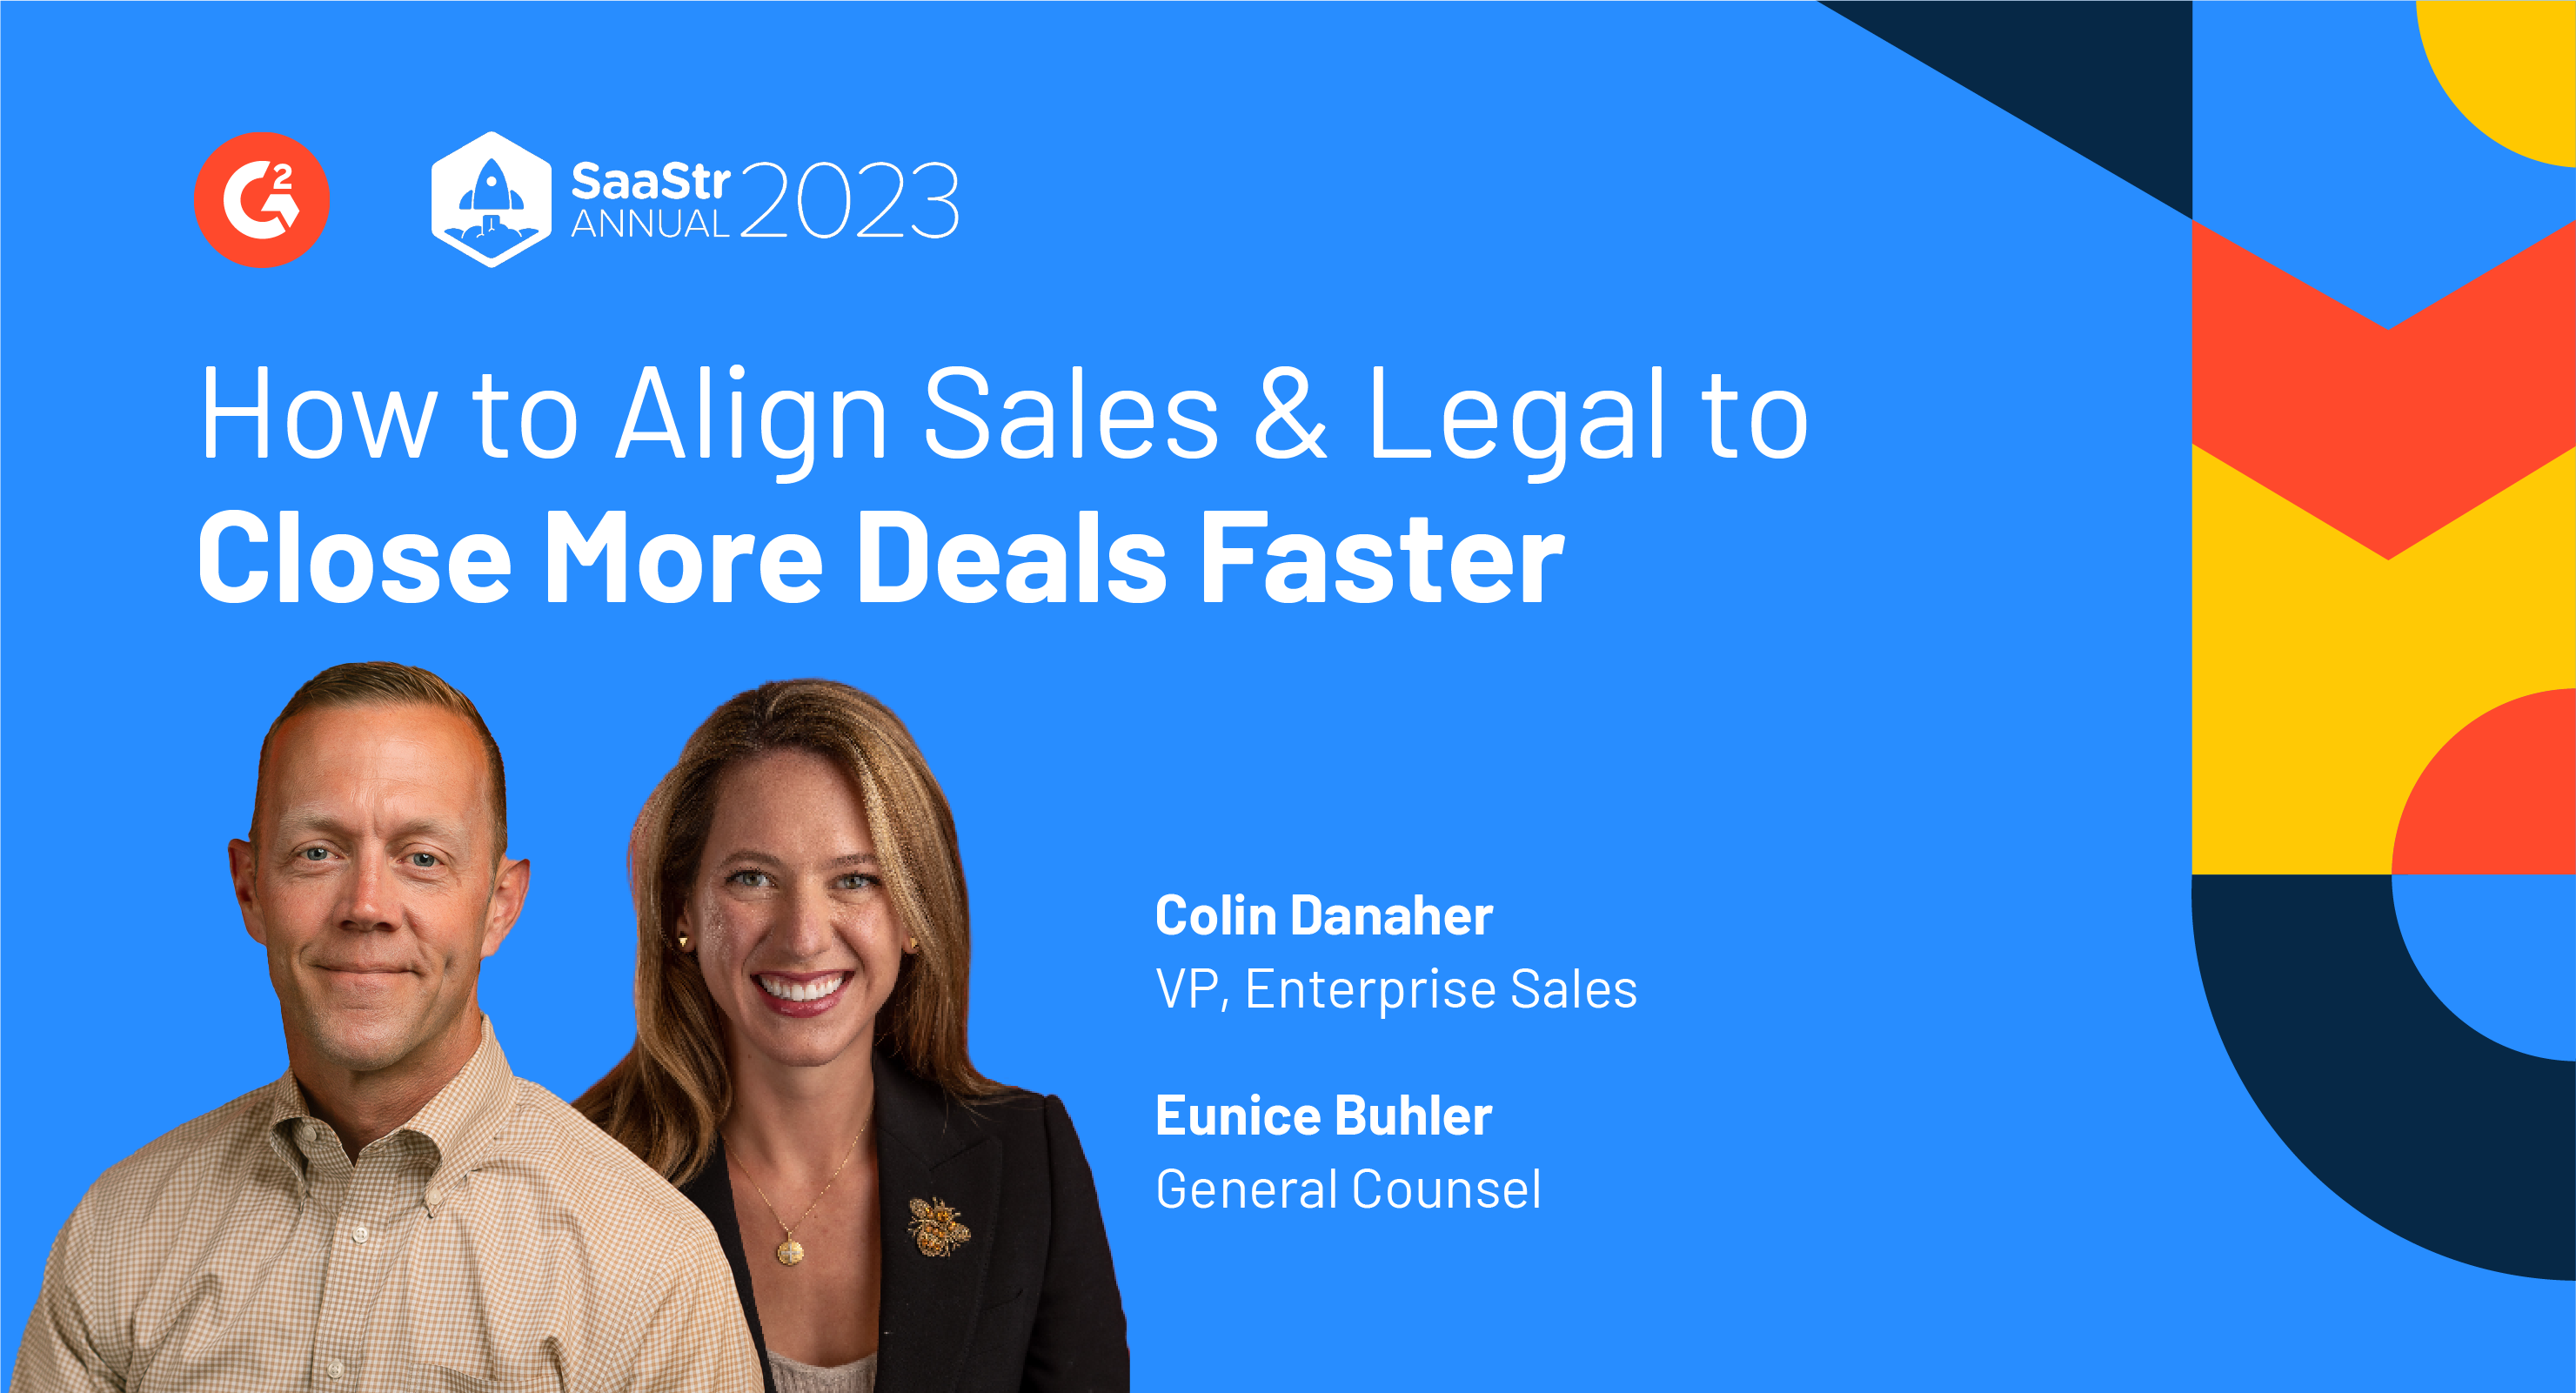 Aligning Sales & Legal to Close More Deals Faster